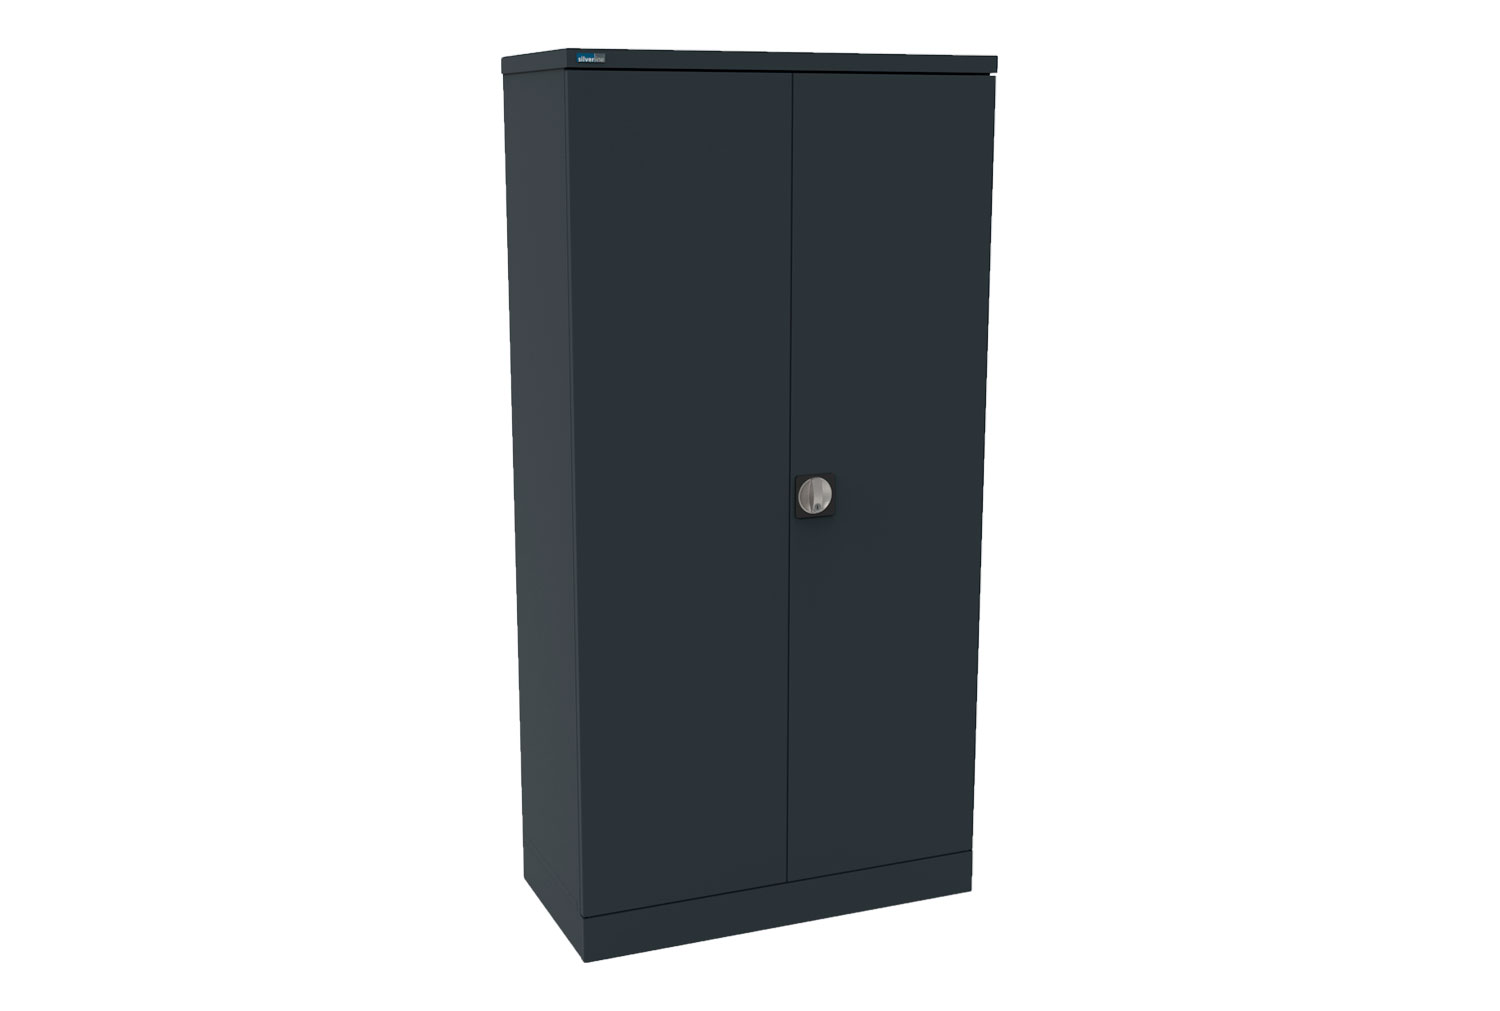 Silverline Kontrax Office Cupboards 183cm High, 3 Shelf - 92wx46dx183h (cm), Anthracite, Fully Installed